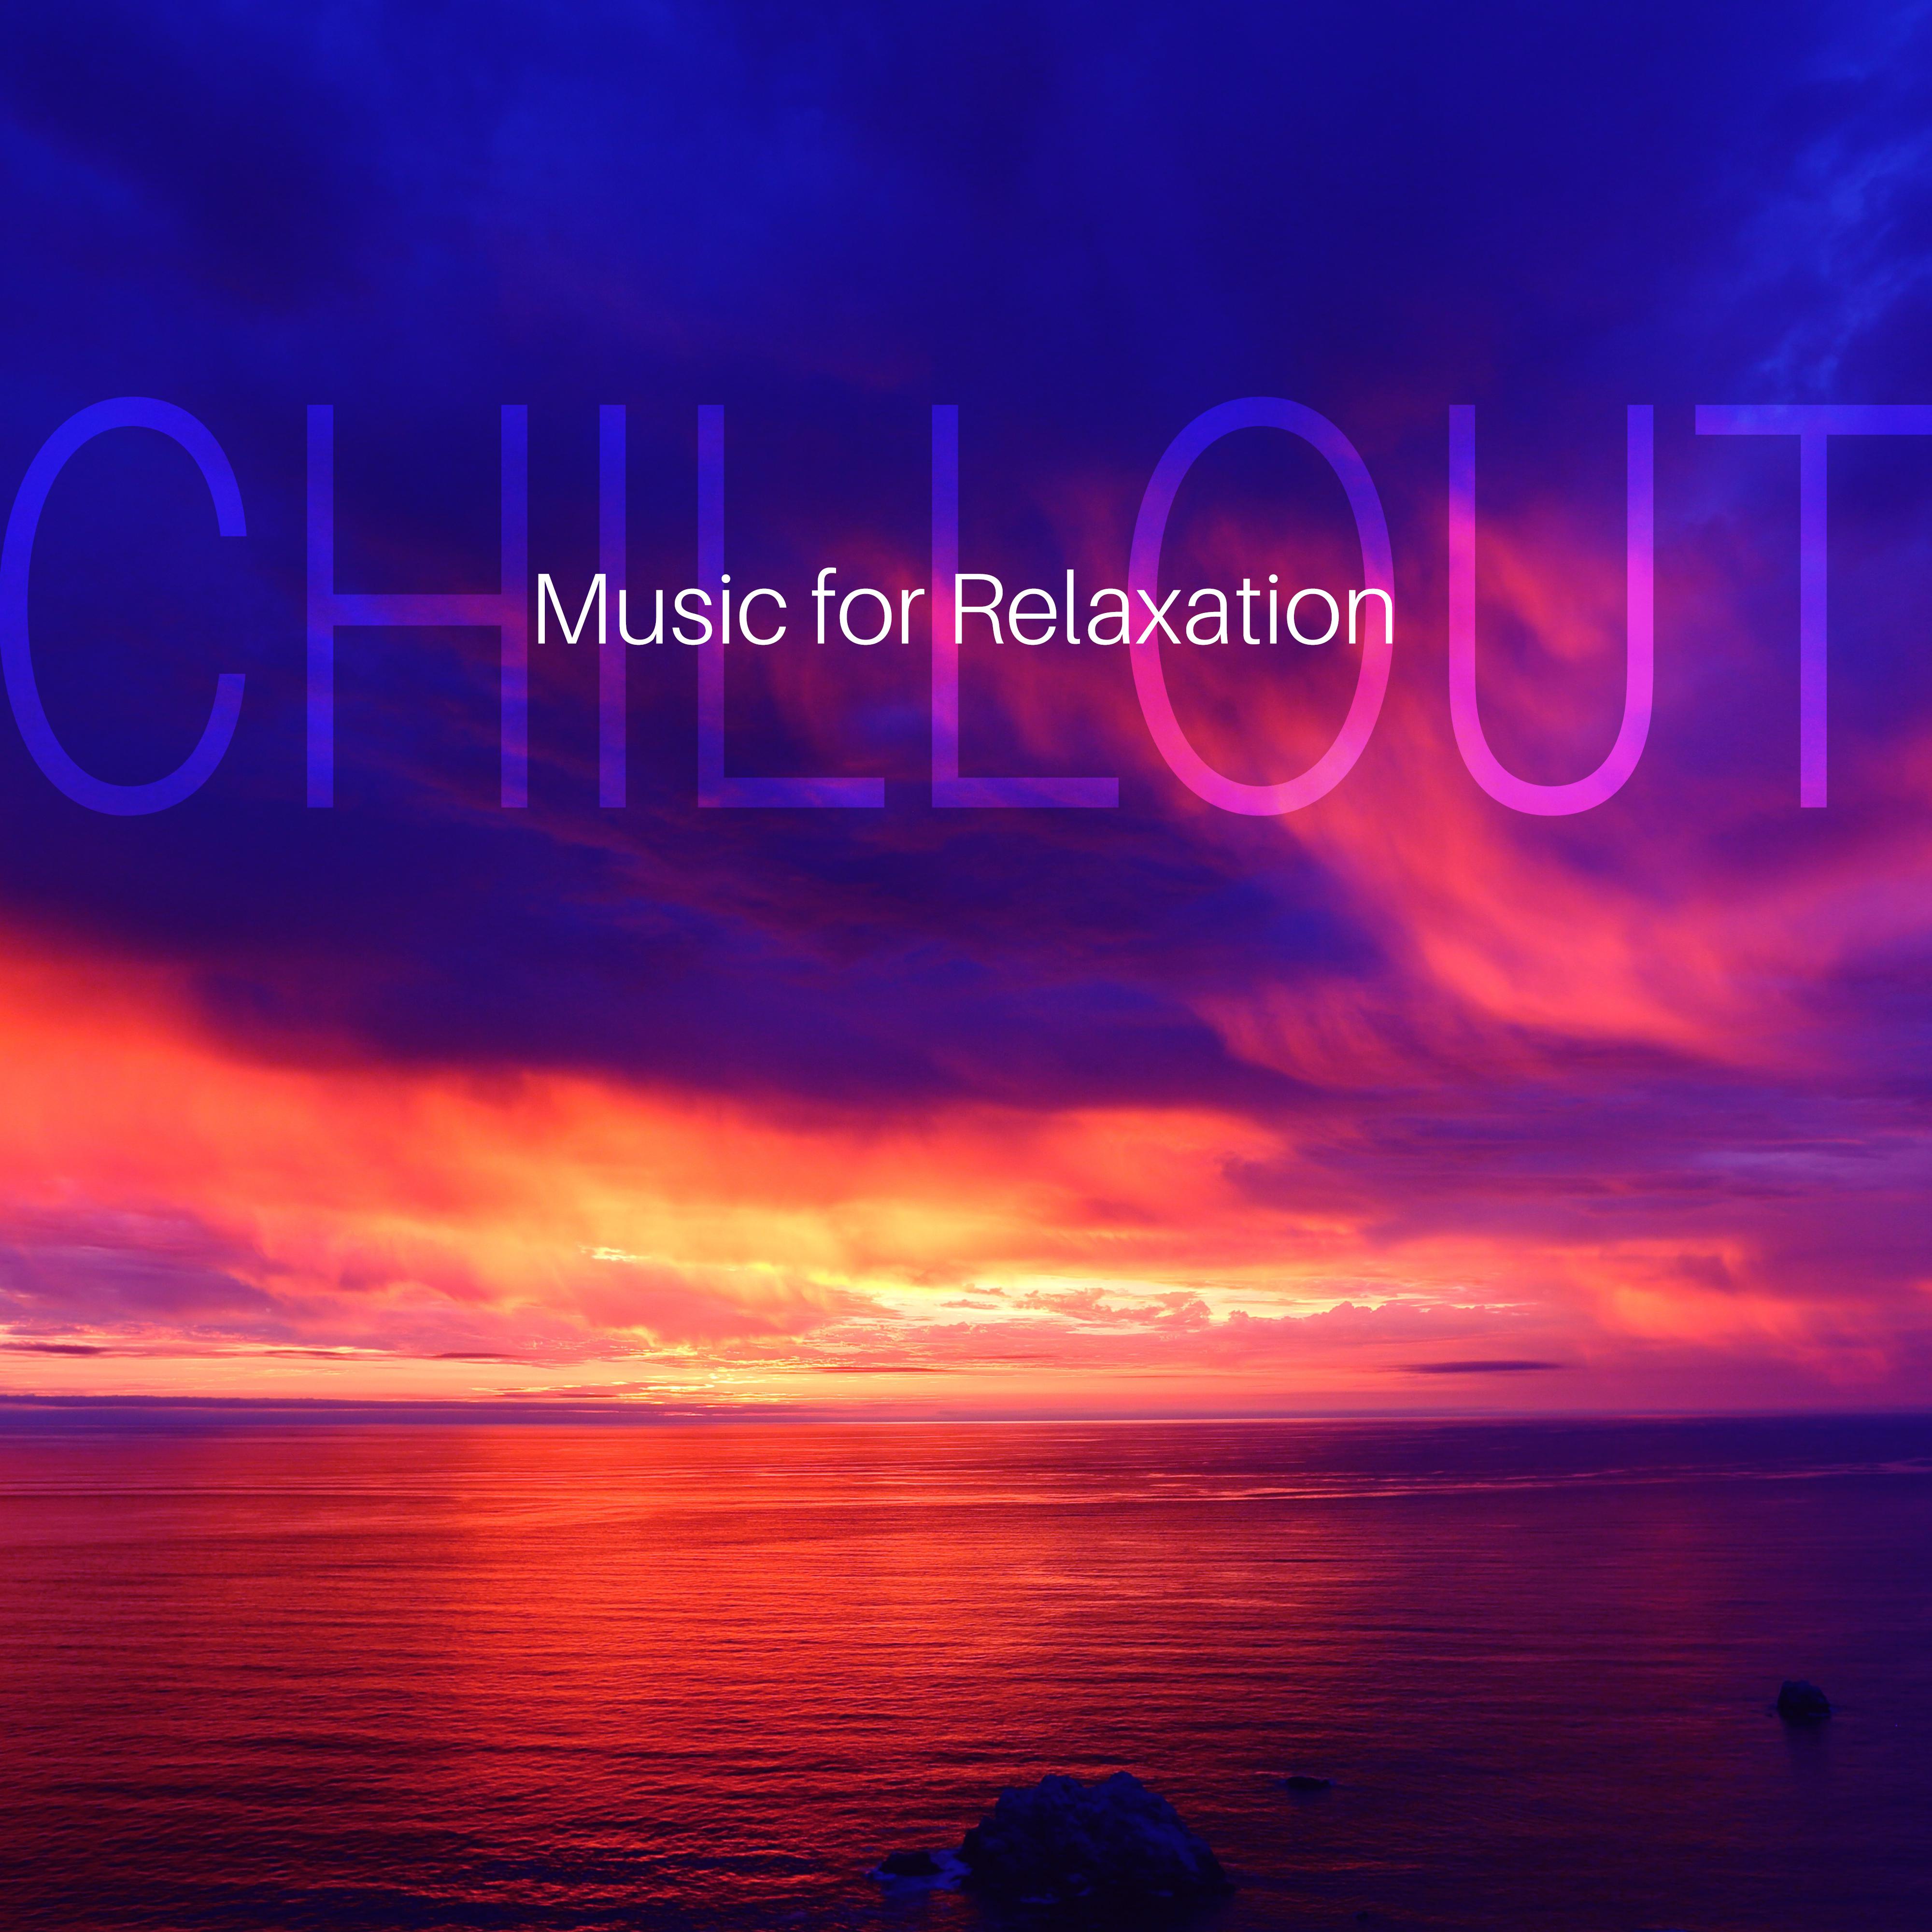 Chillout Music for Relaxation – Soft Chill Out, Deep Meditation, Chill Out 2017, Deep Lounge, Ibiza Summertime, Pure Rest